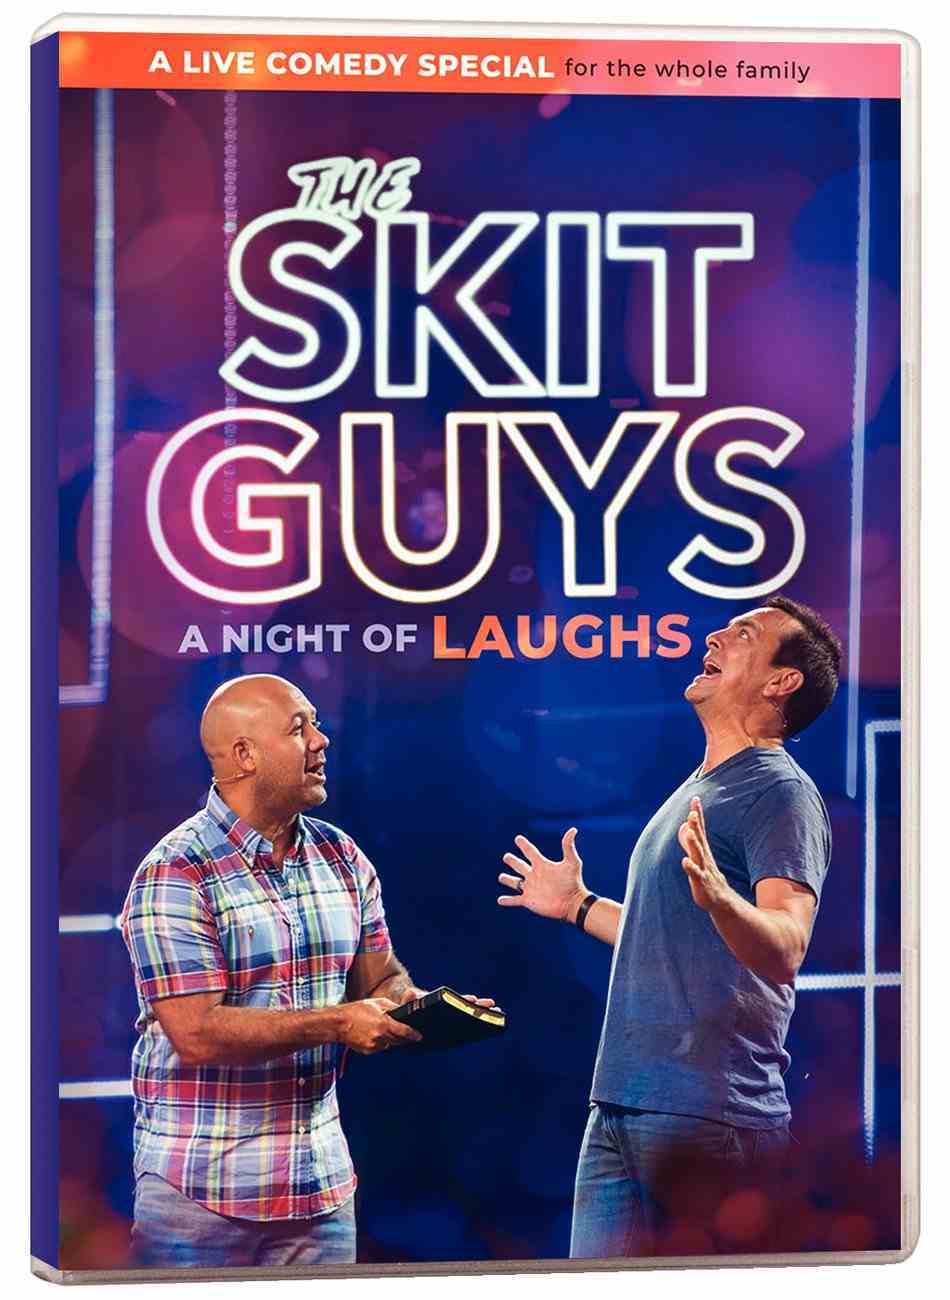 The Skit Guys: A Night of Laughs DVD